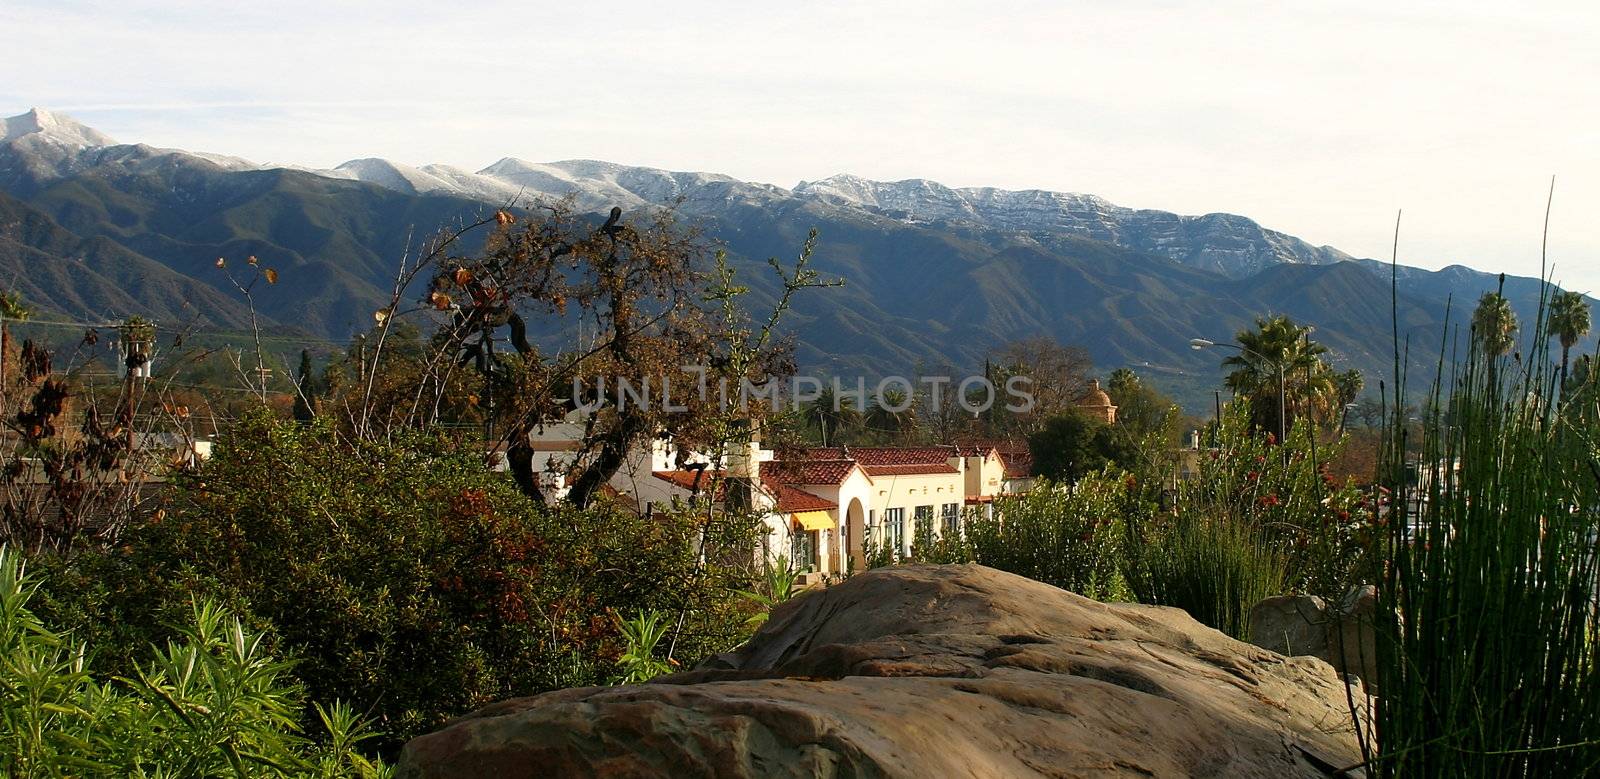 Ojai With Snow (4301) by hlehnerer